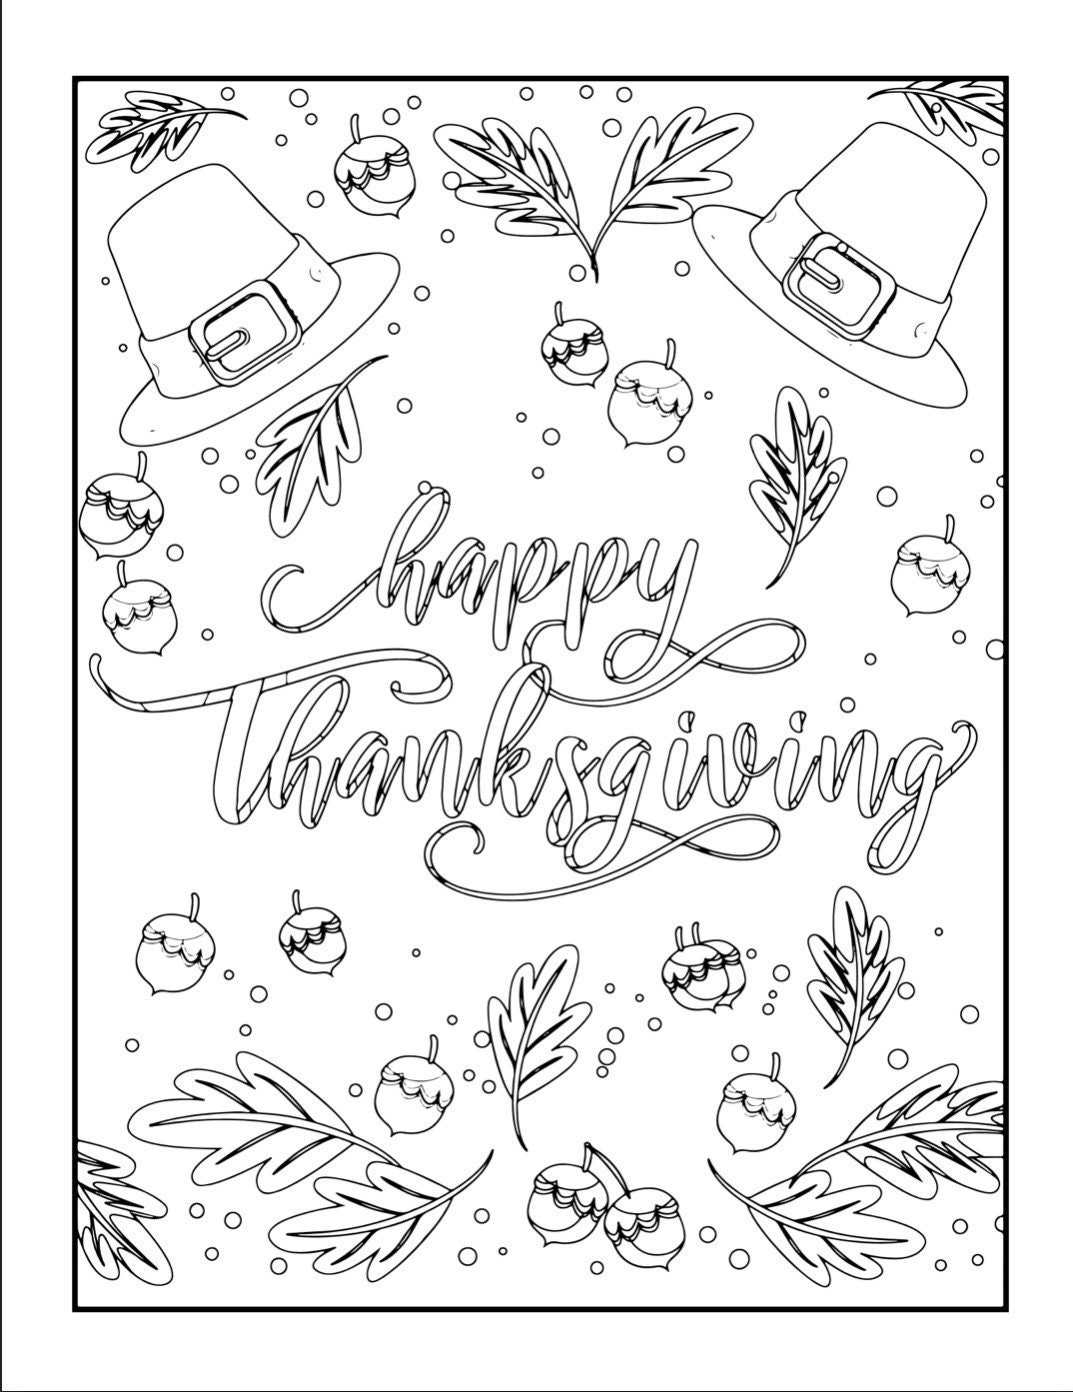 Happy Thanksgiving Coloring Book For Kids Ages 8-12: Thanksgiving Coloring  Pages With Gratitude Drawing Prompts For Children!.Vol-1 (Paperback)